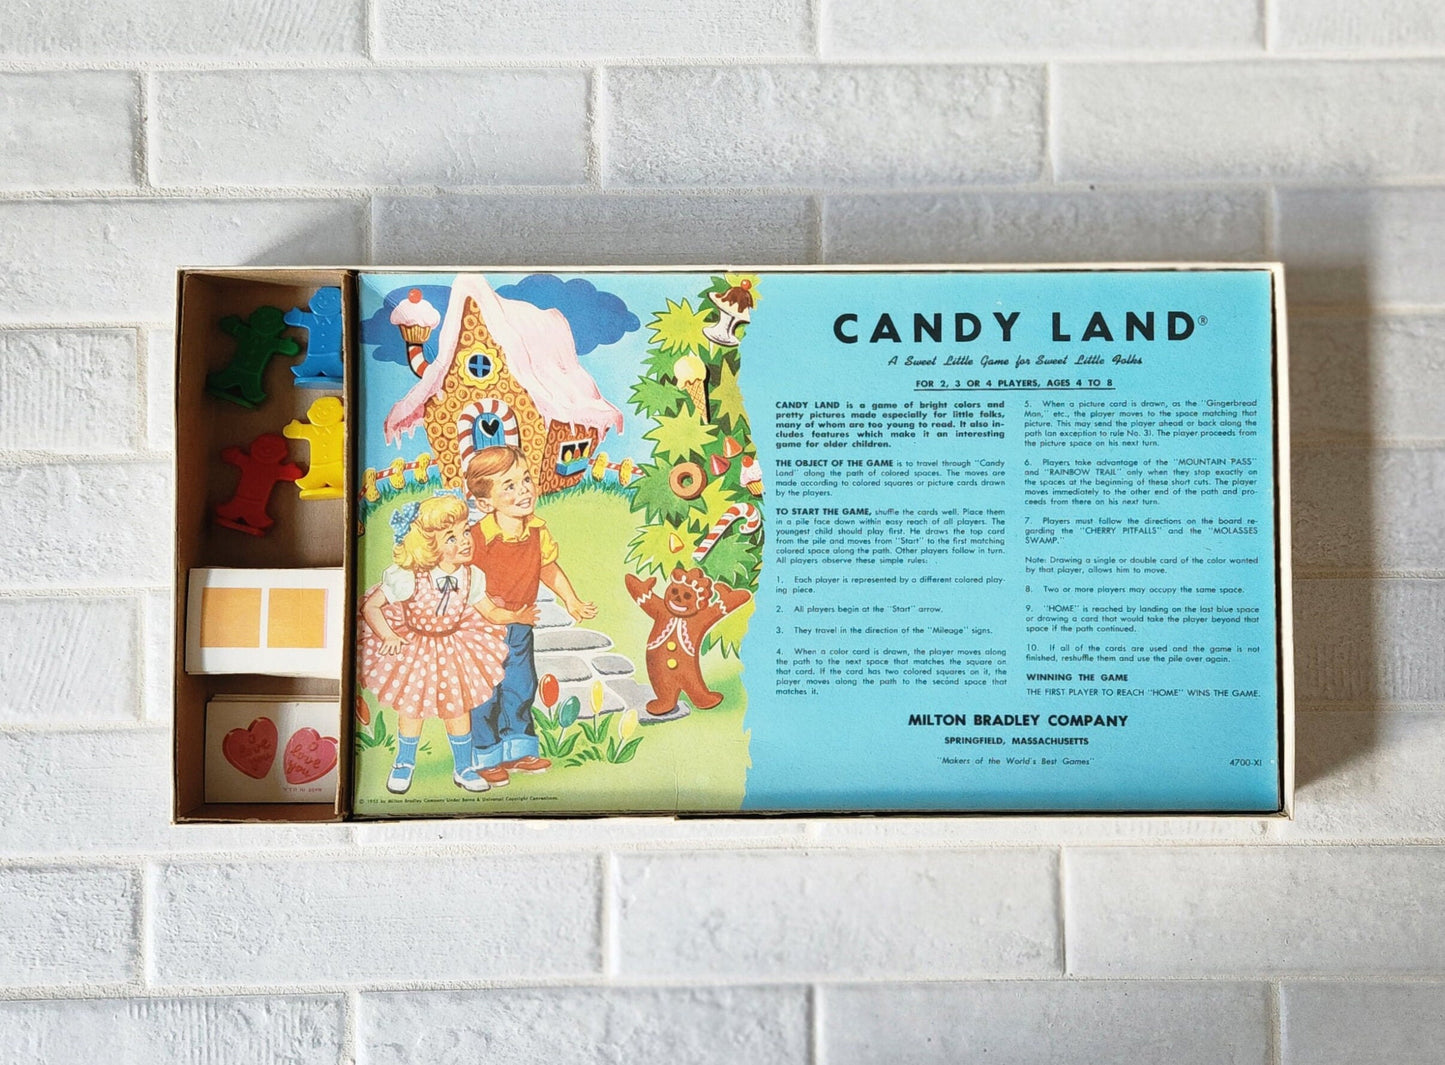 Display and Play 1962 Candy Land Framed Board Game